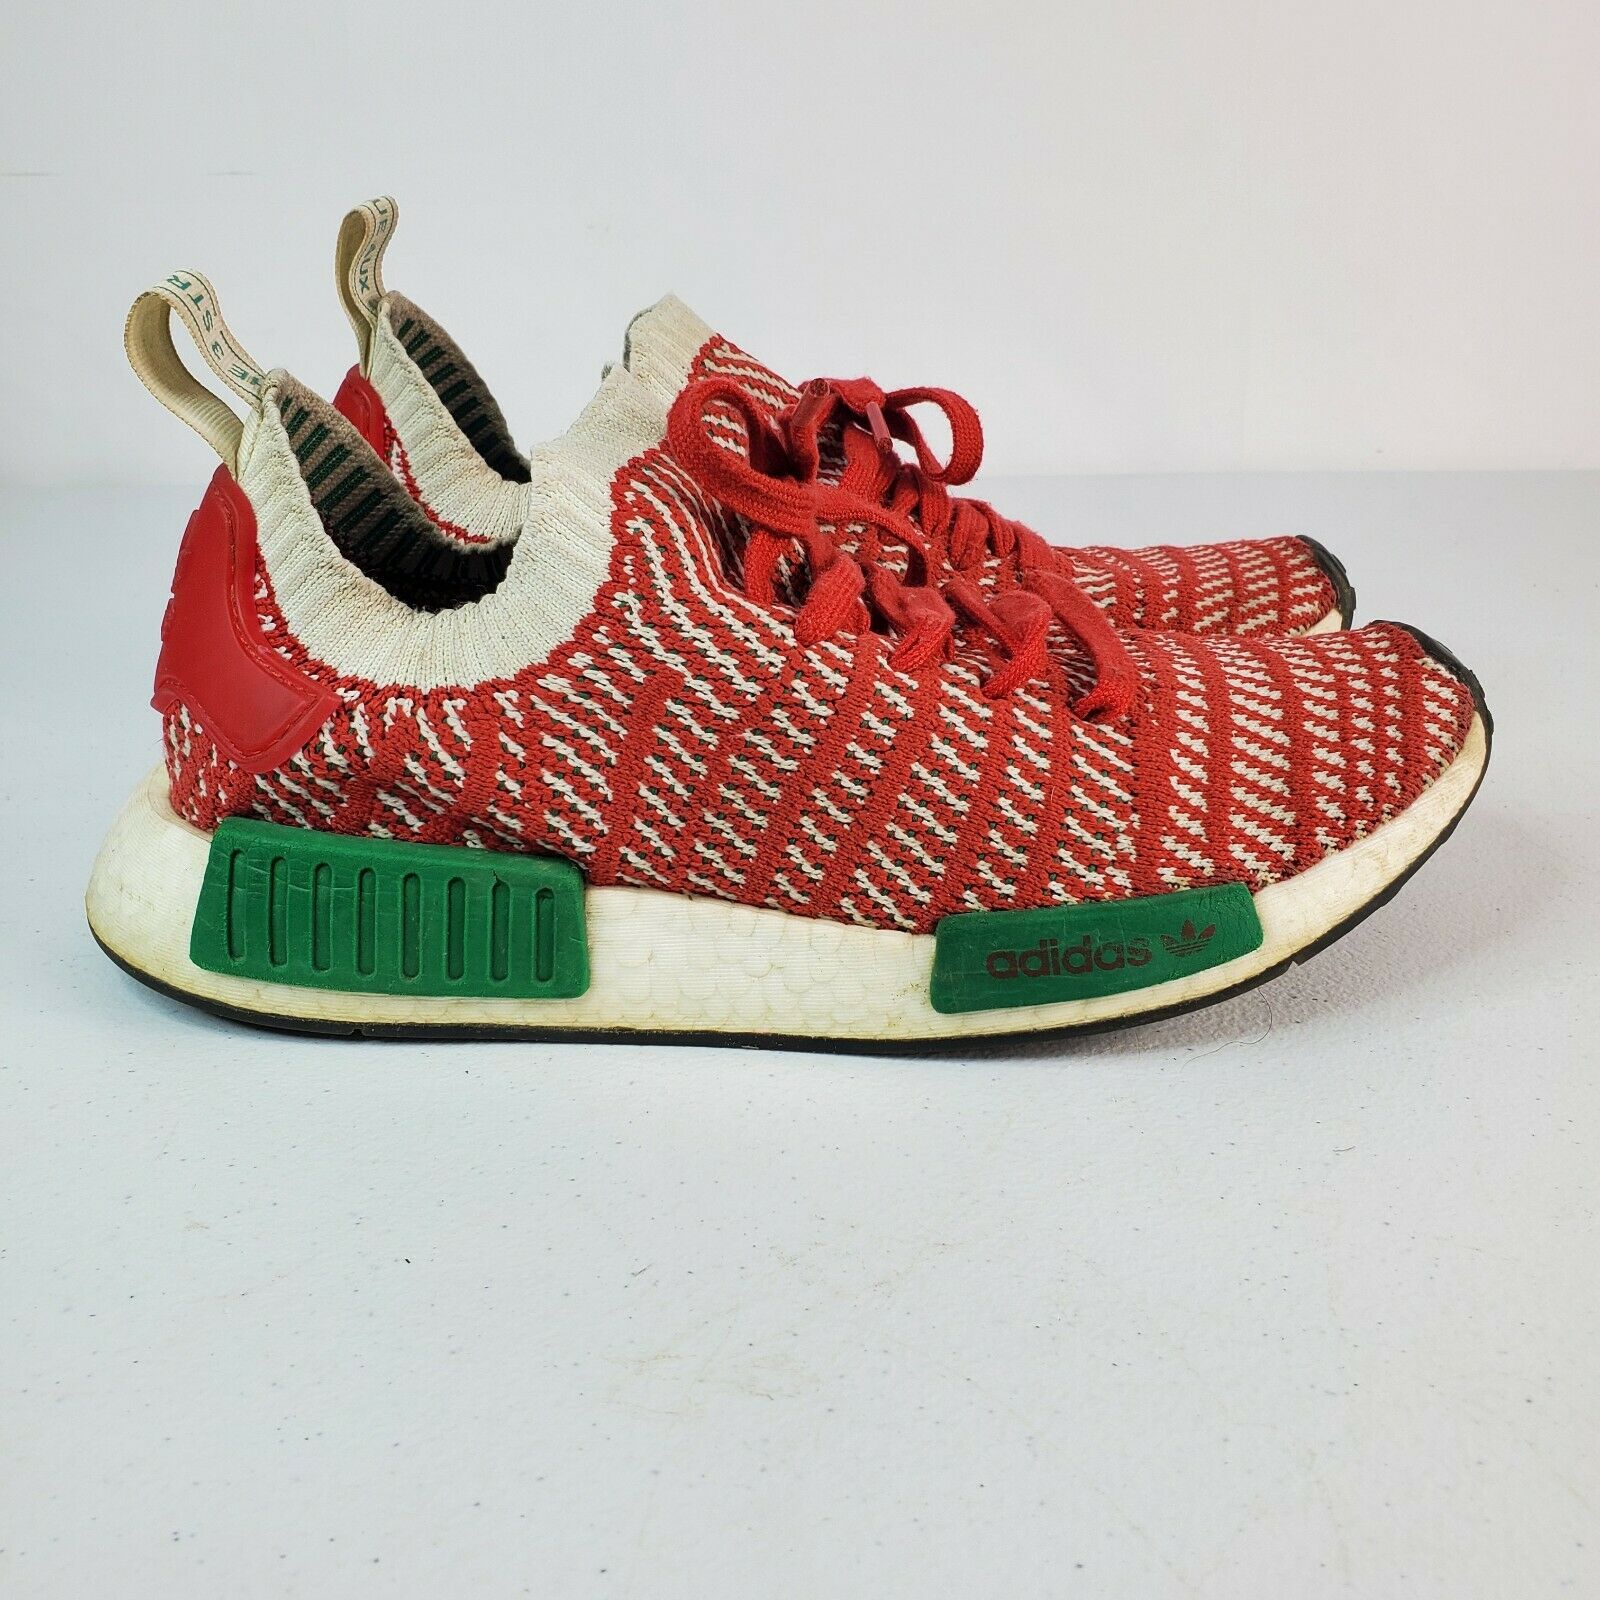 Adidas NMD_R1 Mens Primeknit Athletic Shoes Christmas Colorway Size 7 No Insoles